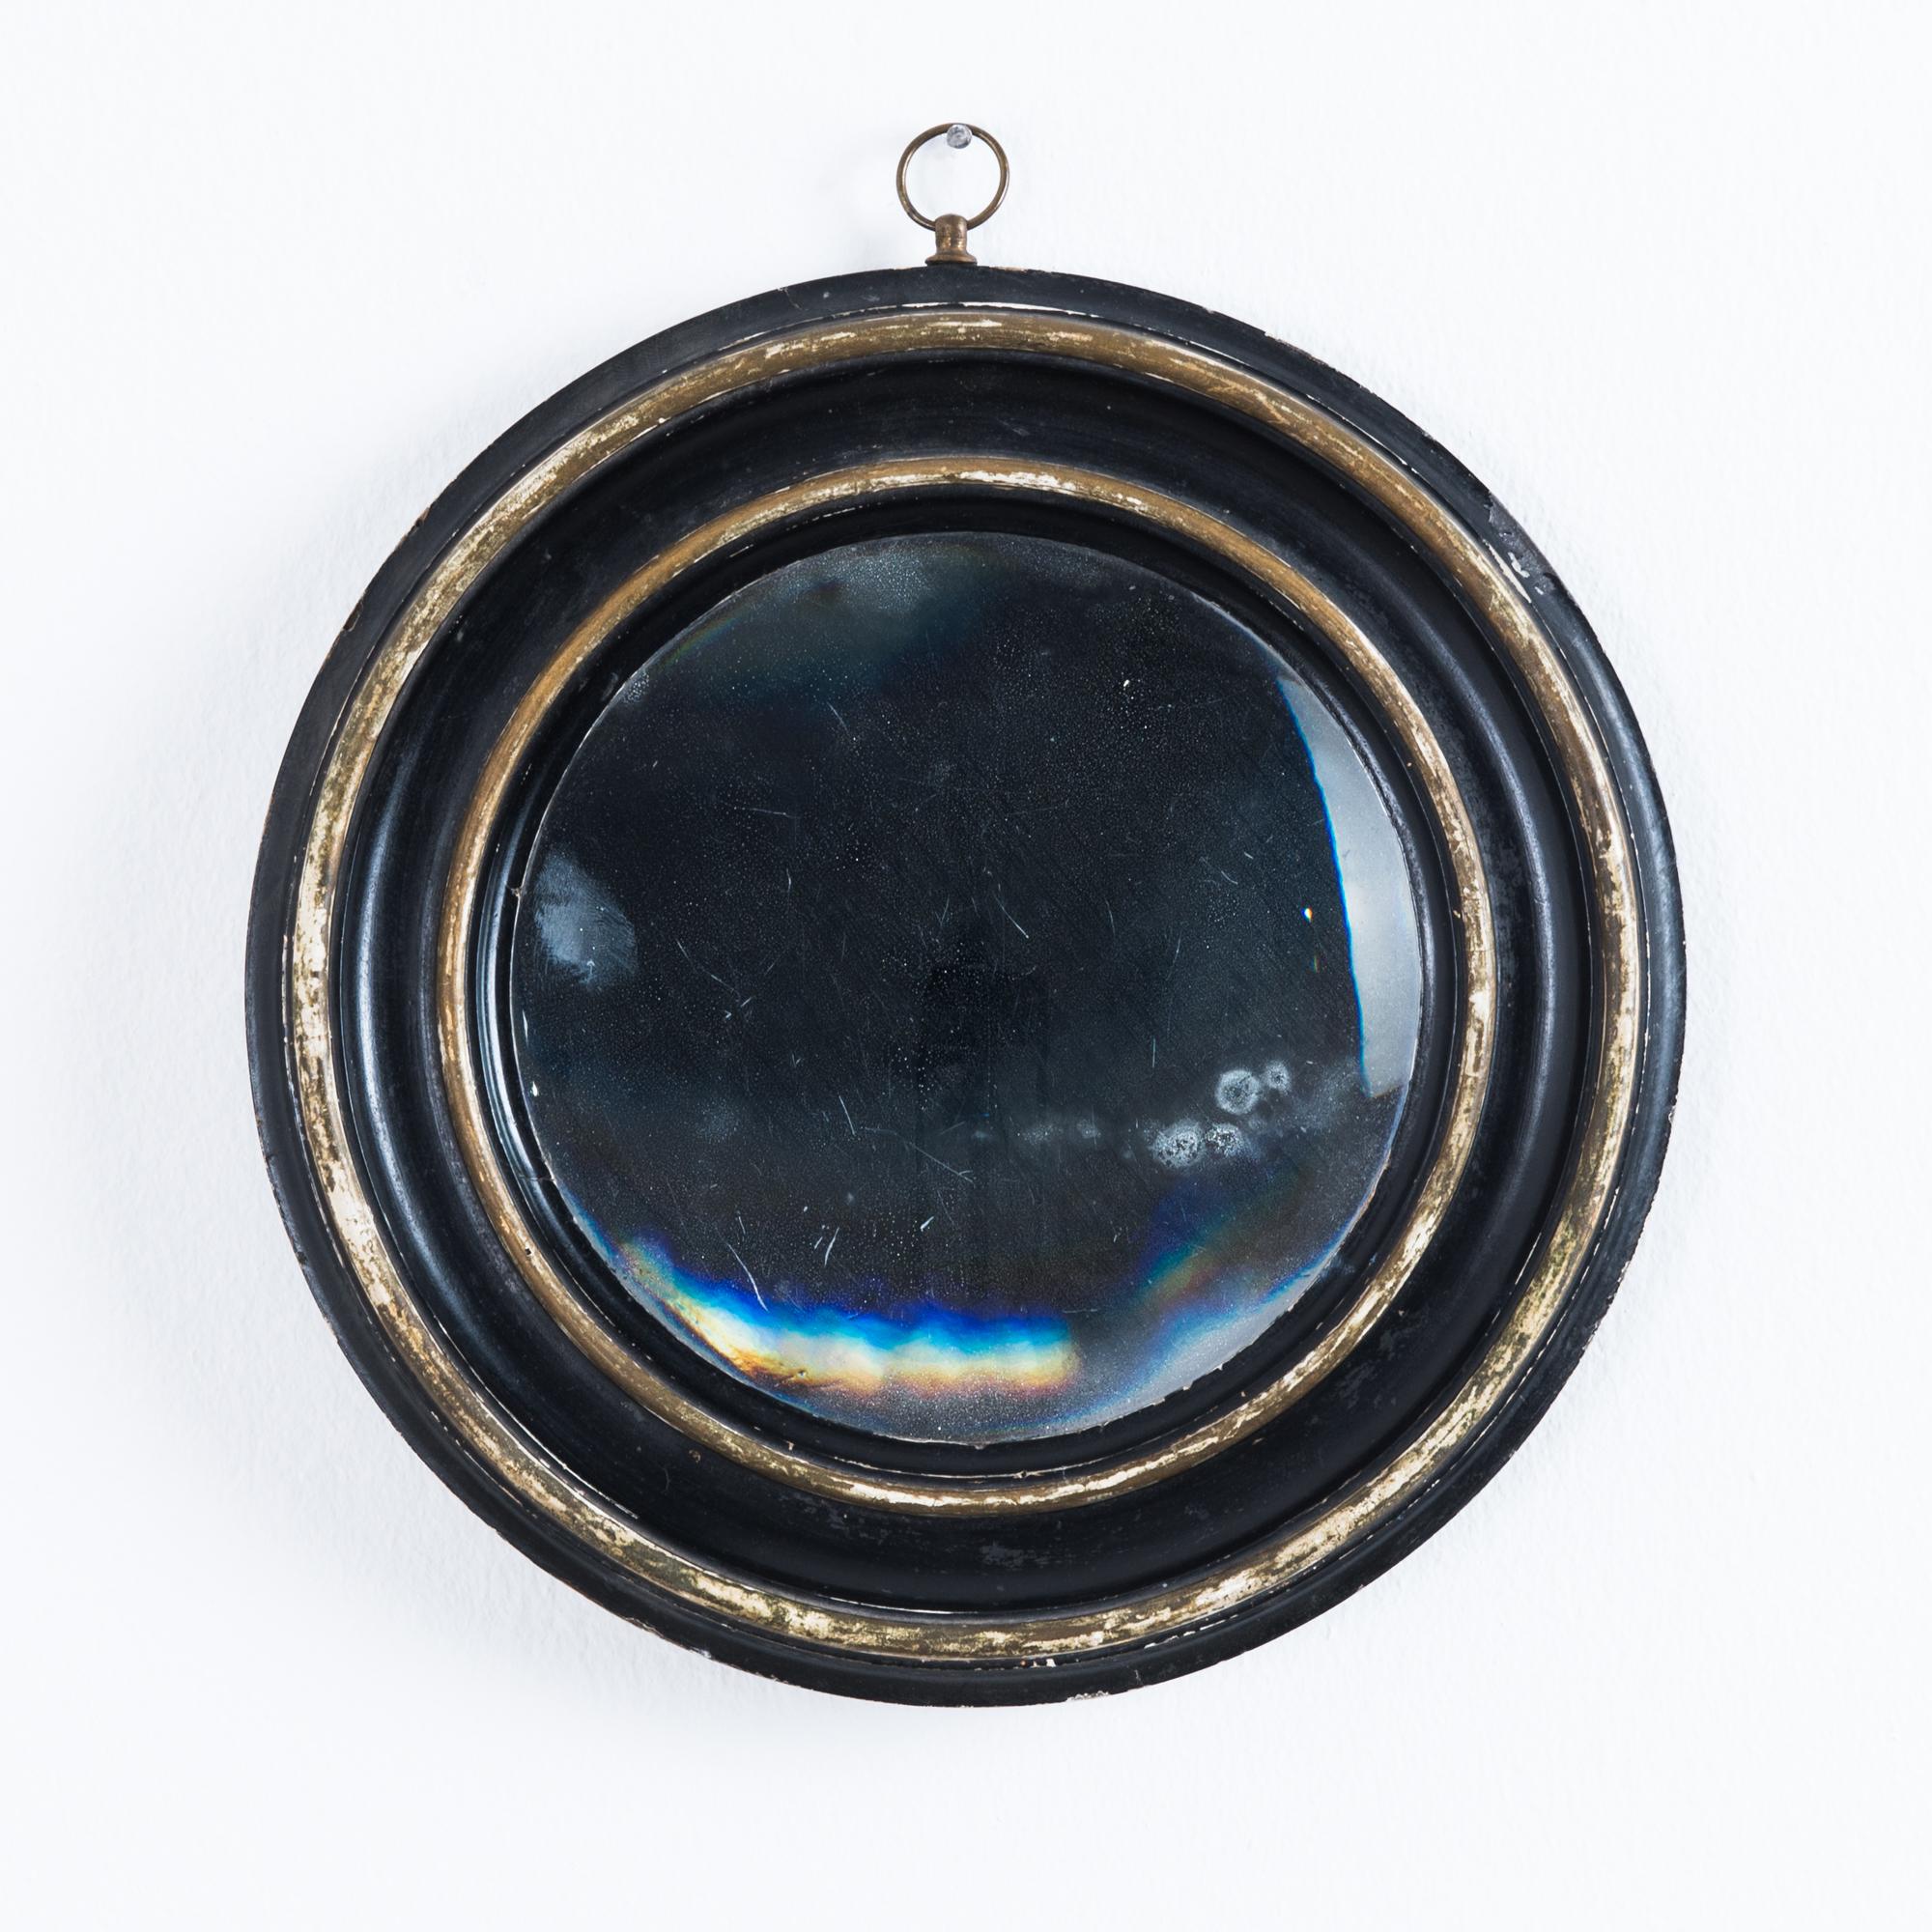 This circular mirror was made in France, circa 1880. Its wooden frame is painted black with two circles of aging gold leaf, circling the original mercury mirror. Mounting this mirror on the wall is effortless with the ring hook at the top.